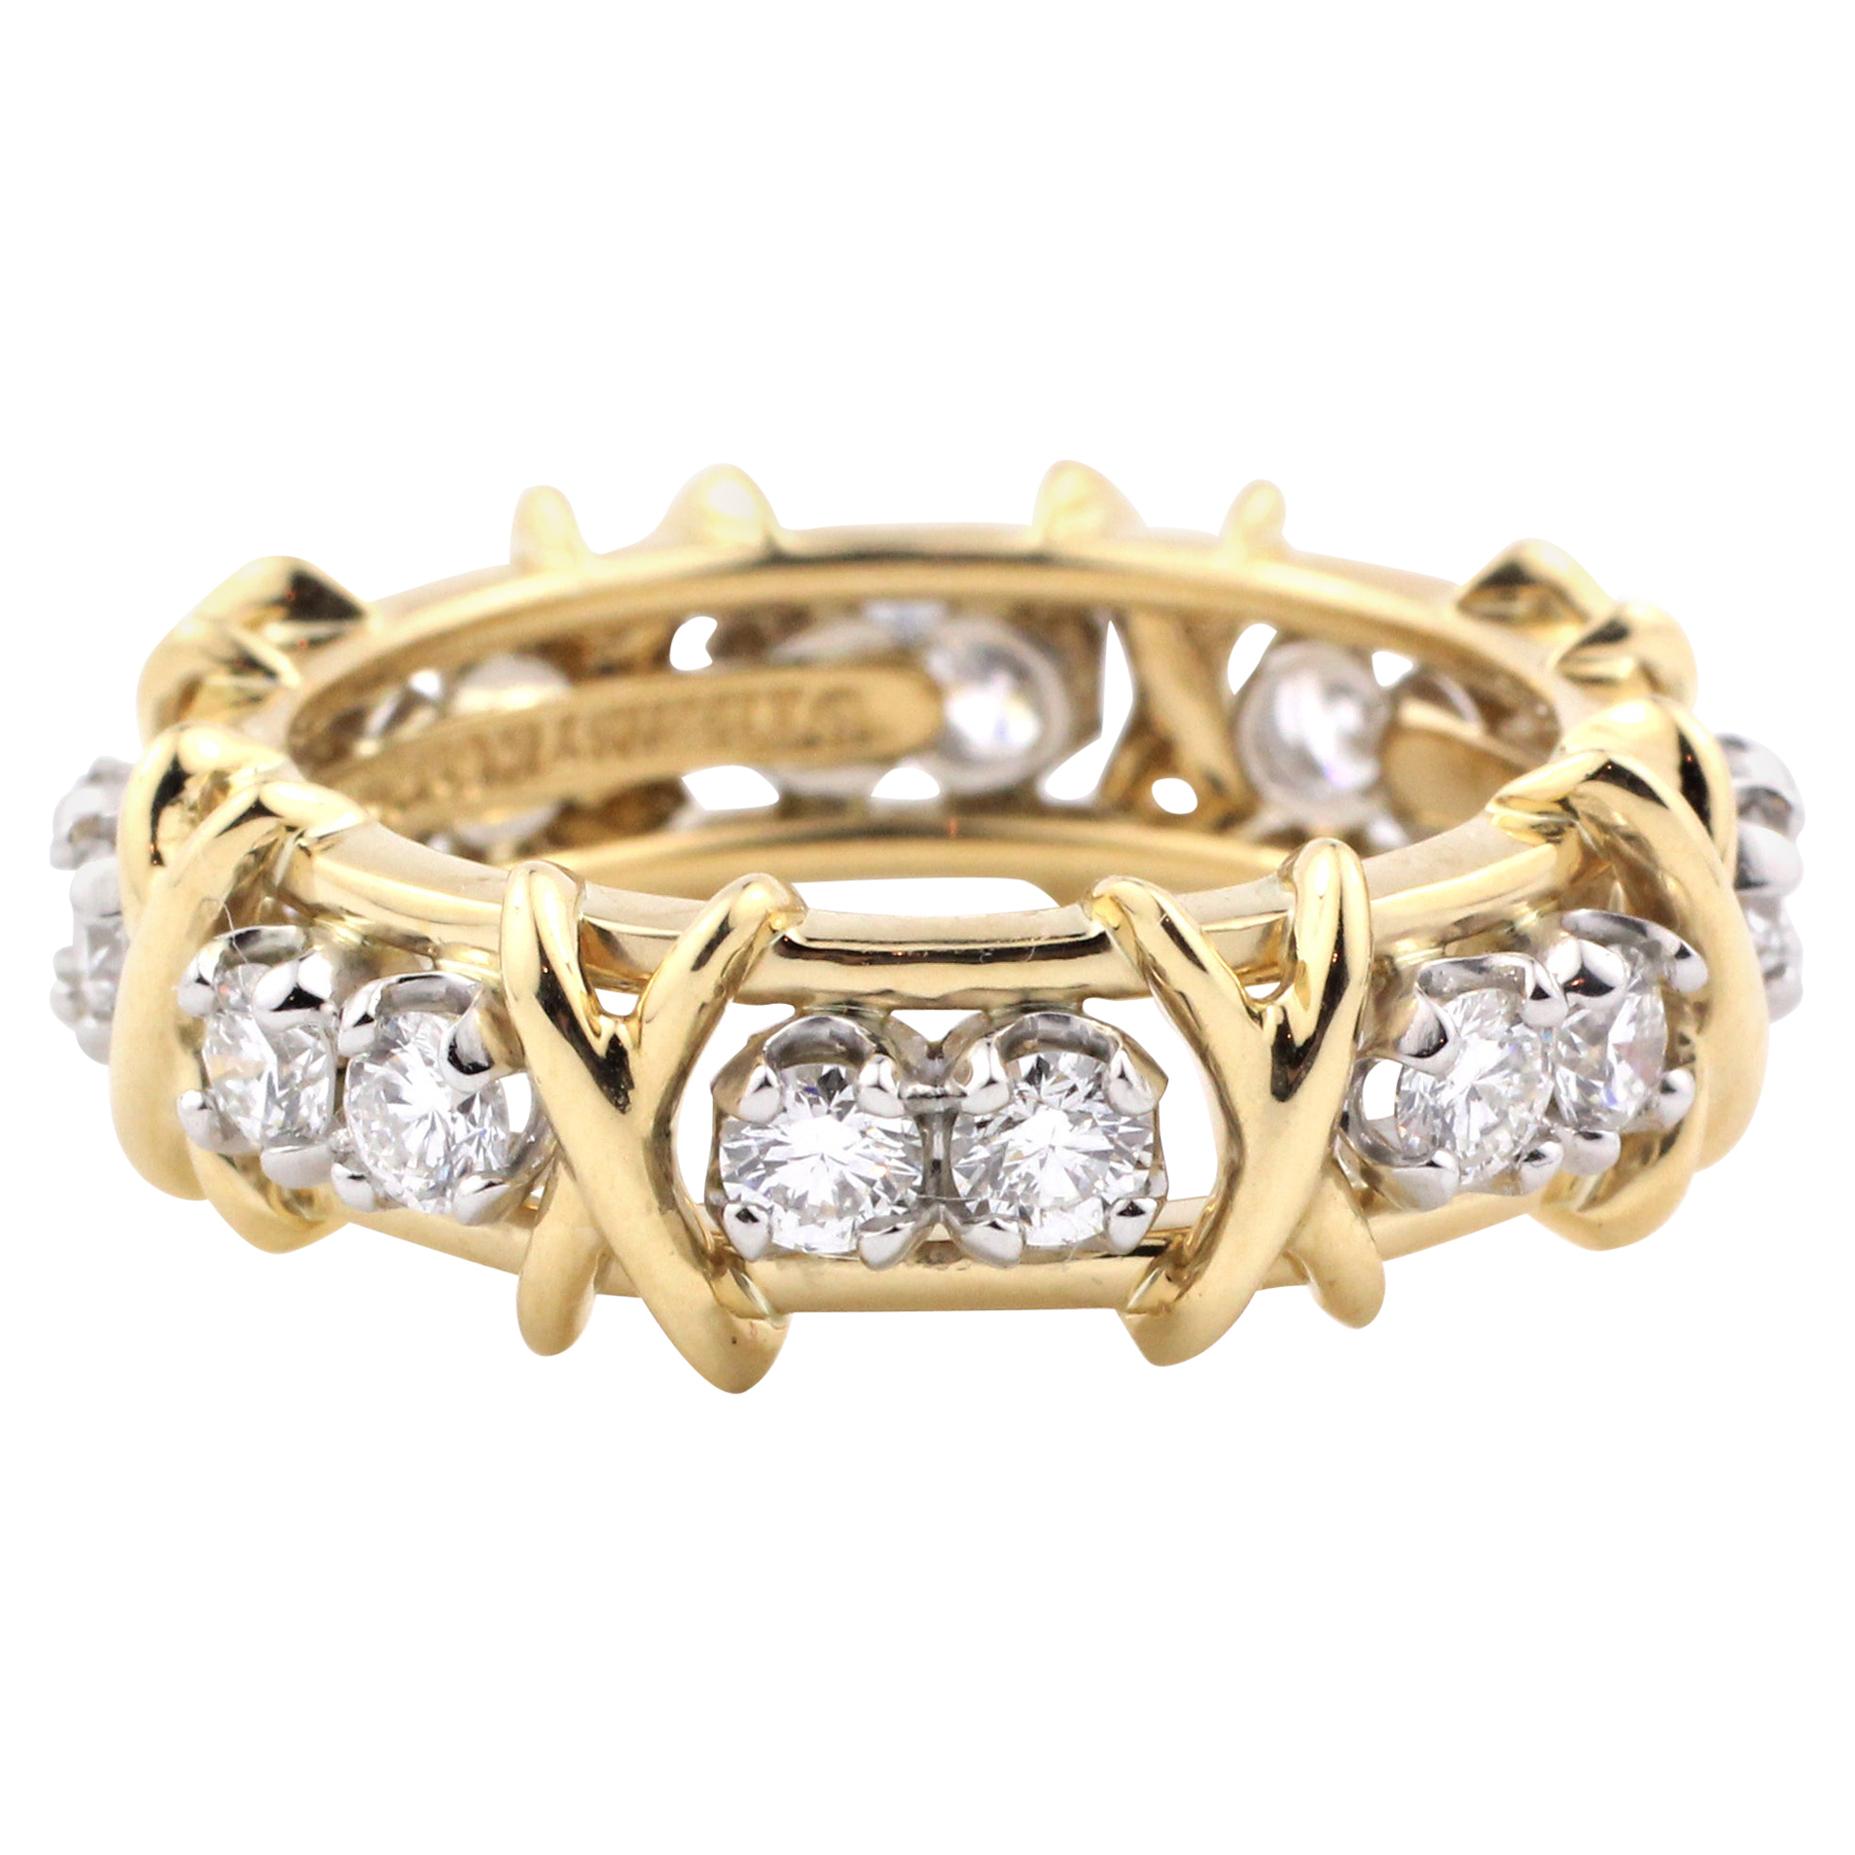 Tiffany & Co. Gold and Platinum Schlumberger Diamond Ring